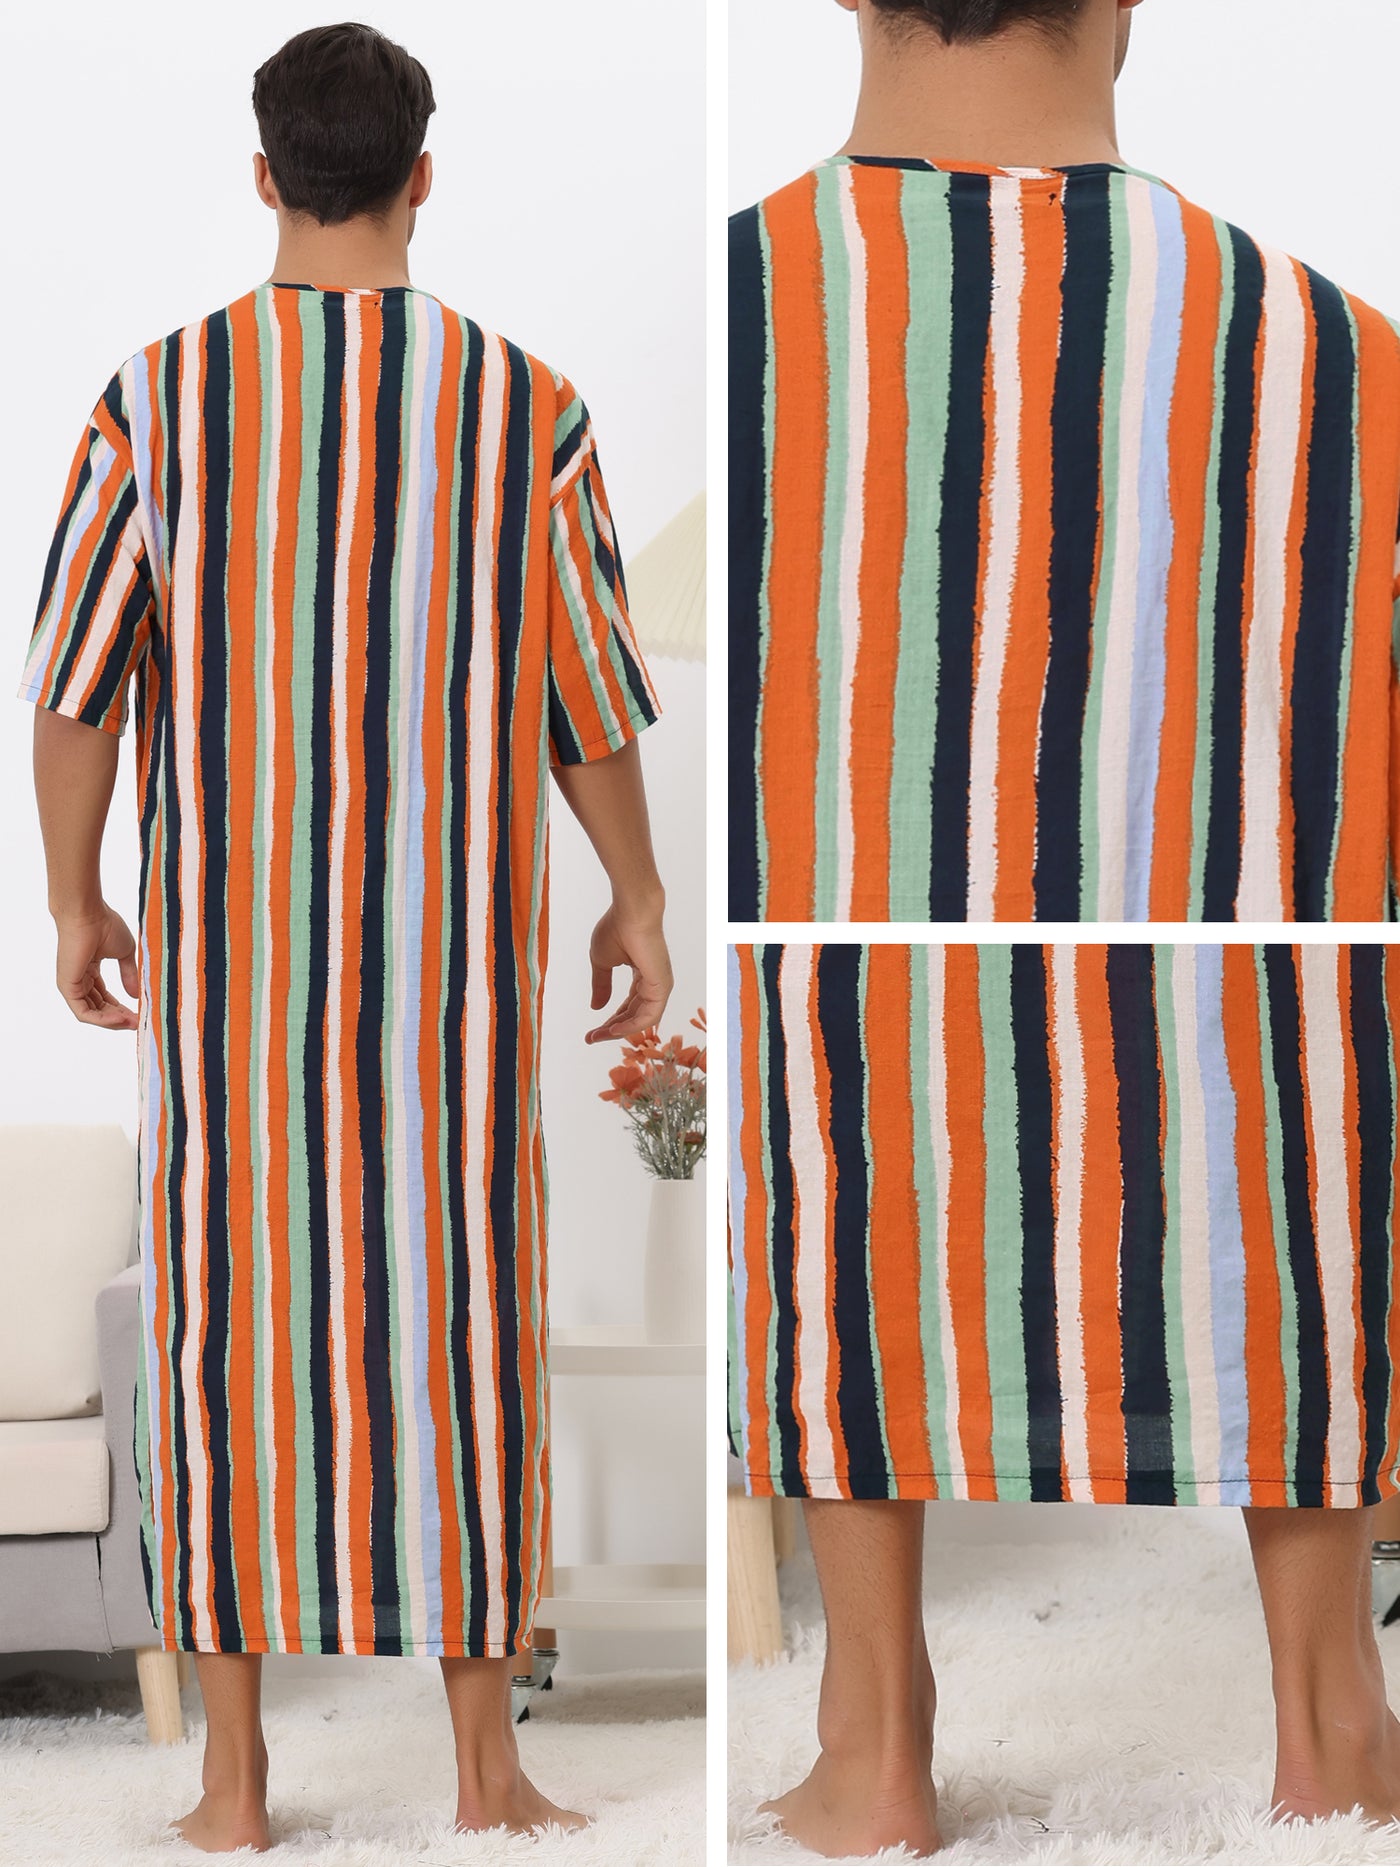 Bublédon Striped Nightshirts for Men's Contrast Colors Long Sleeves Button Down Stripes Nightgown